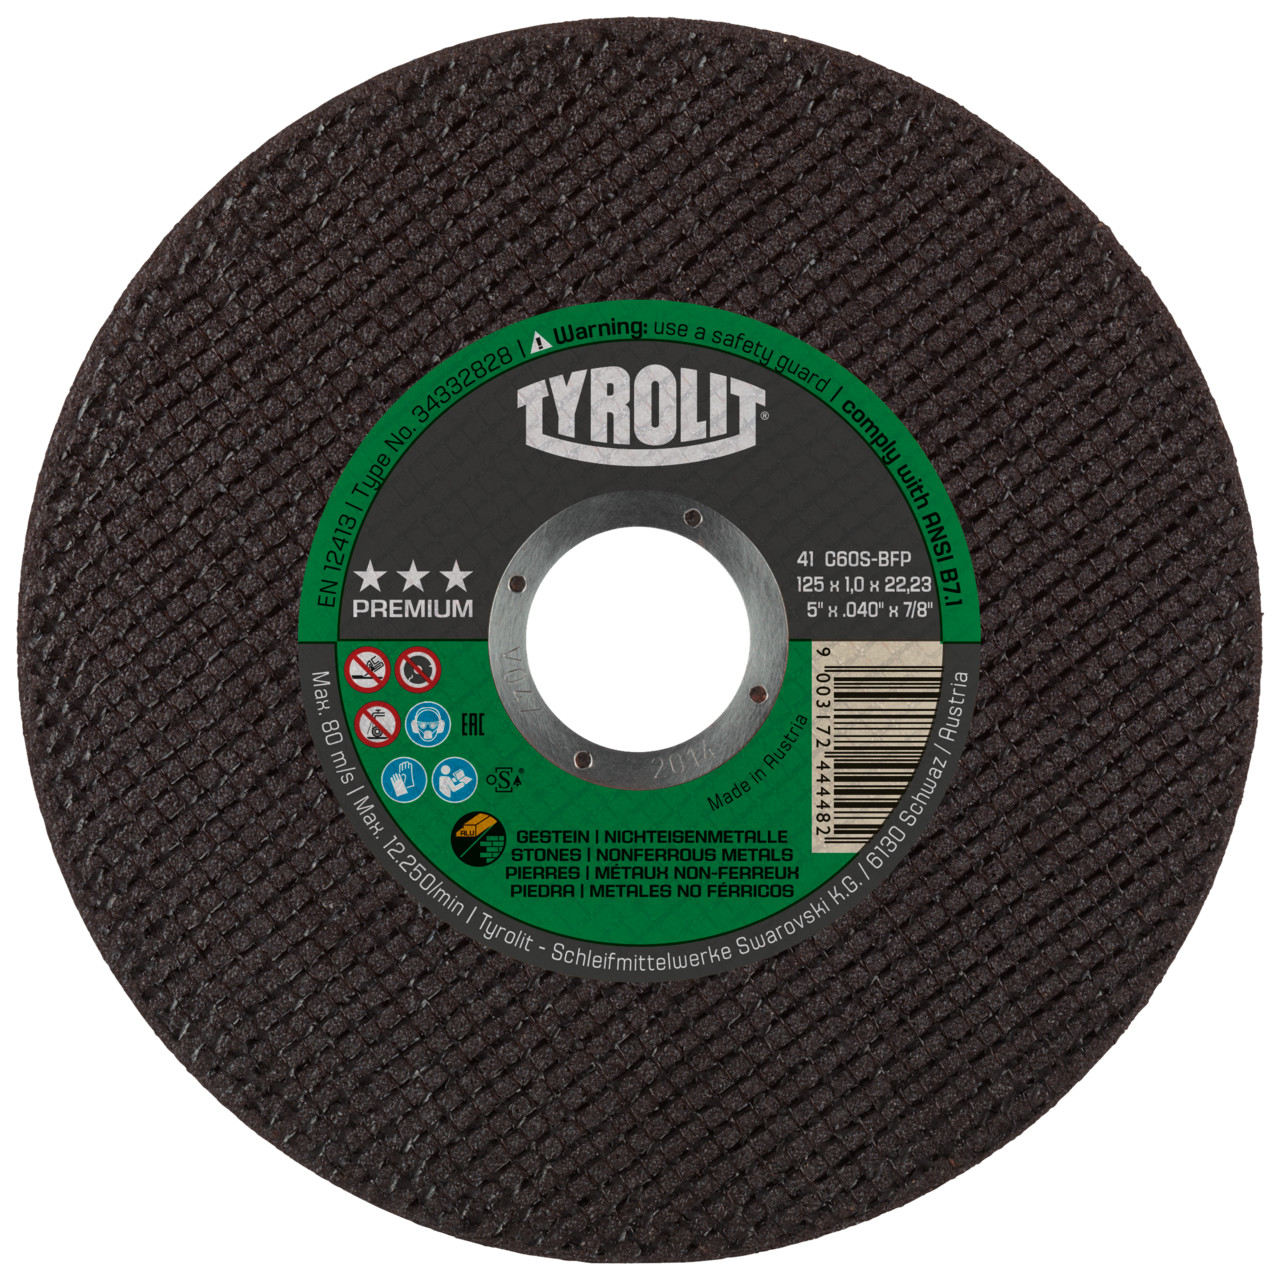 TYROLIT cut-off wheels DxDxH 115x1.0x22.23 For non-ferrous metals and stone, shape: 41 - straight version, Art. 34332827